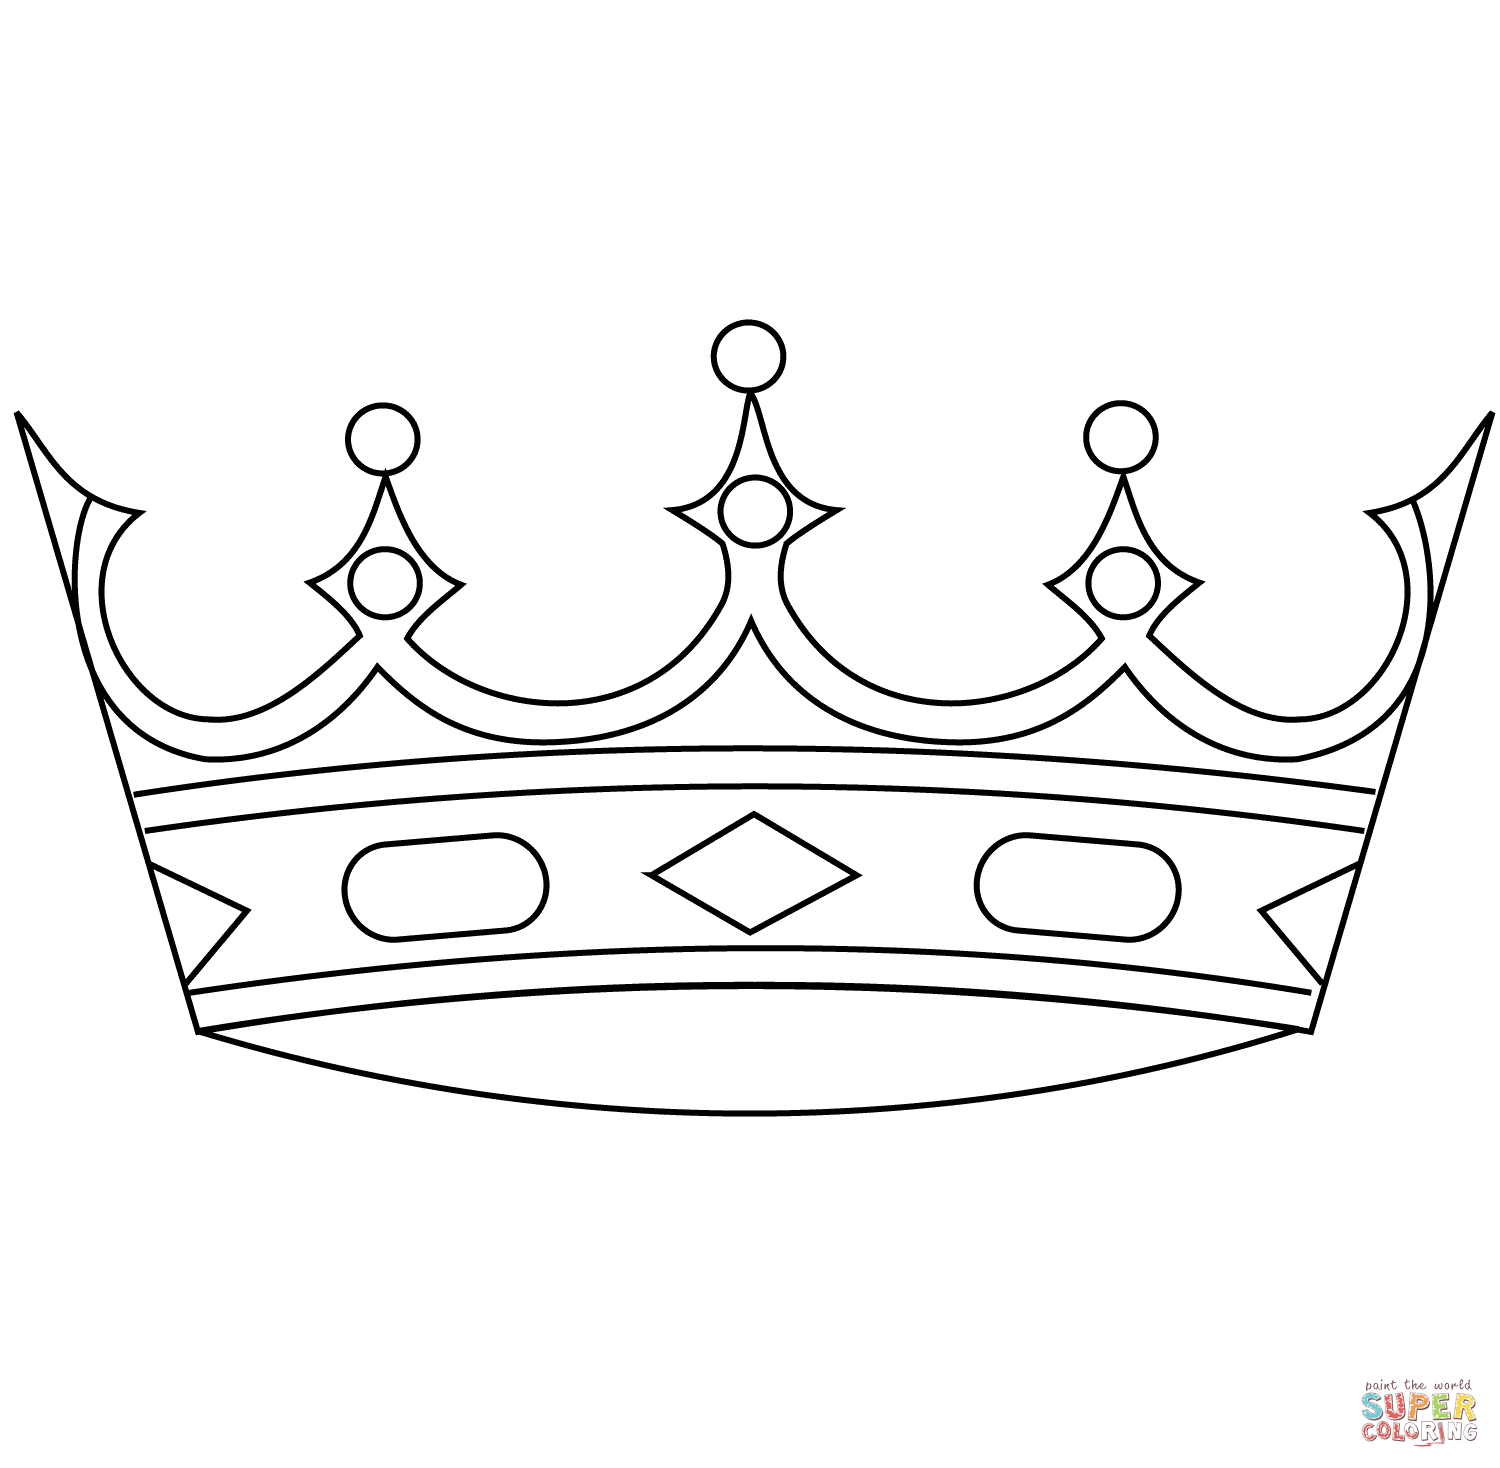 King Crowns Coloring Pages Coloring Home